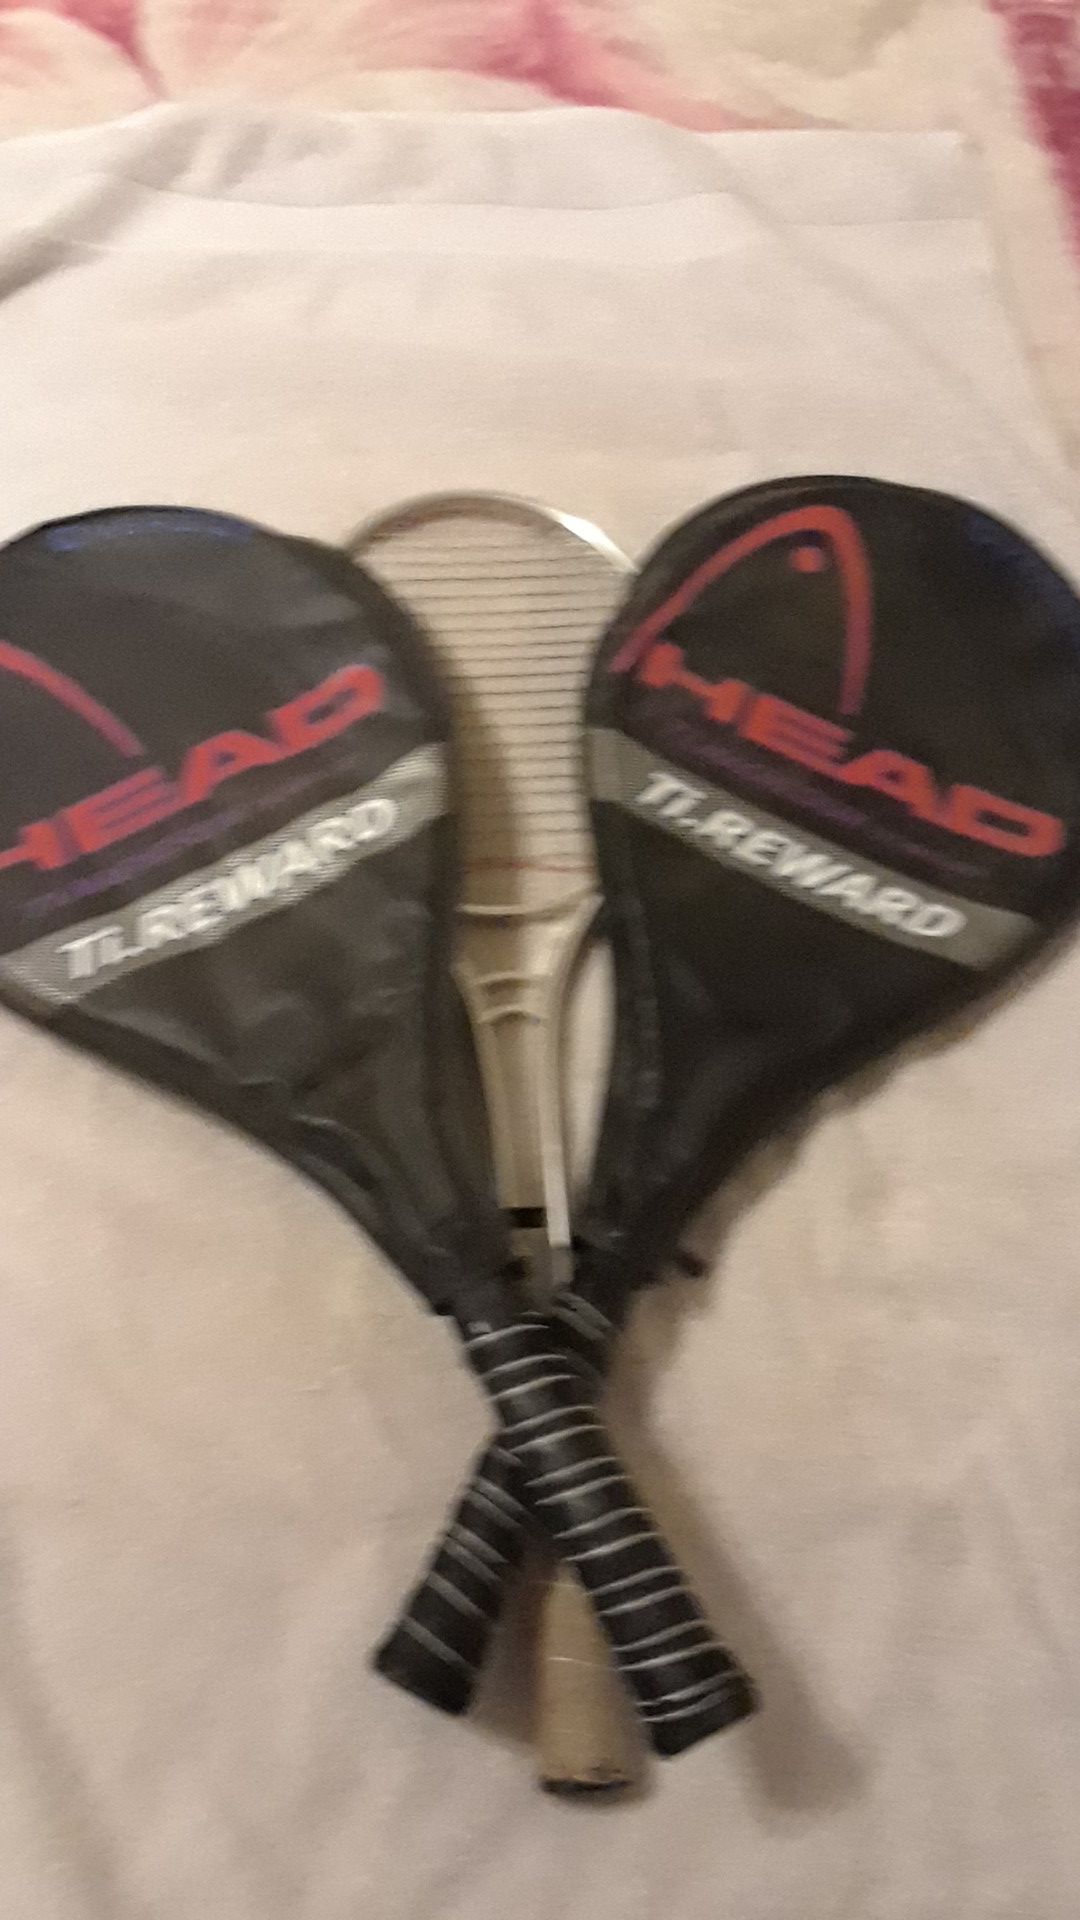 Tennis rackets used in great shape $10